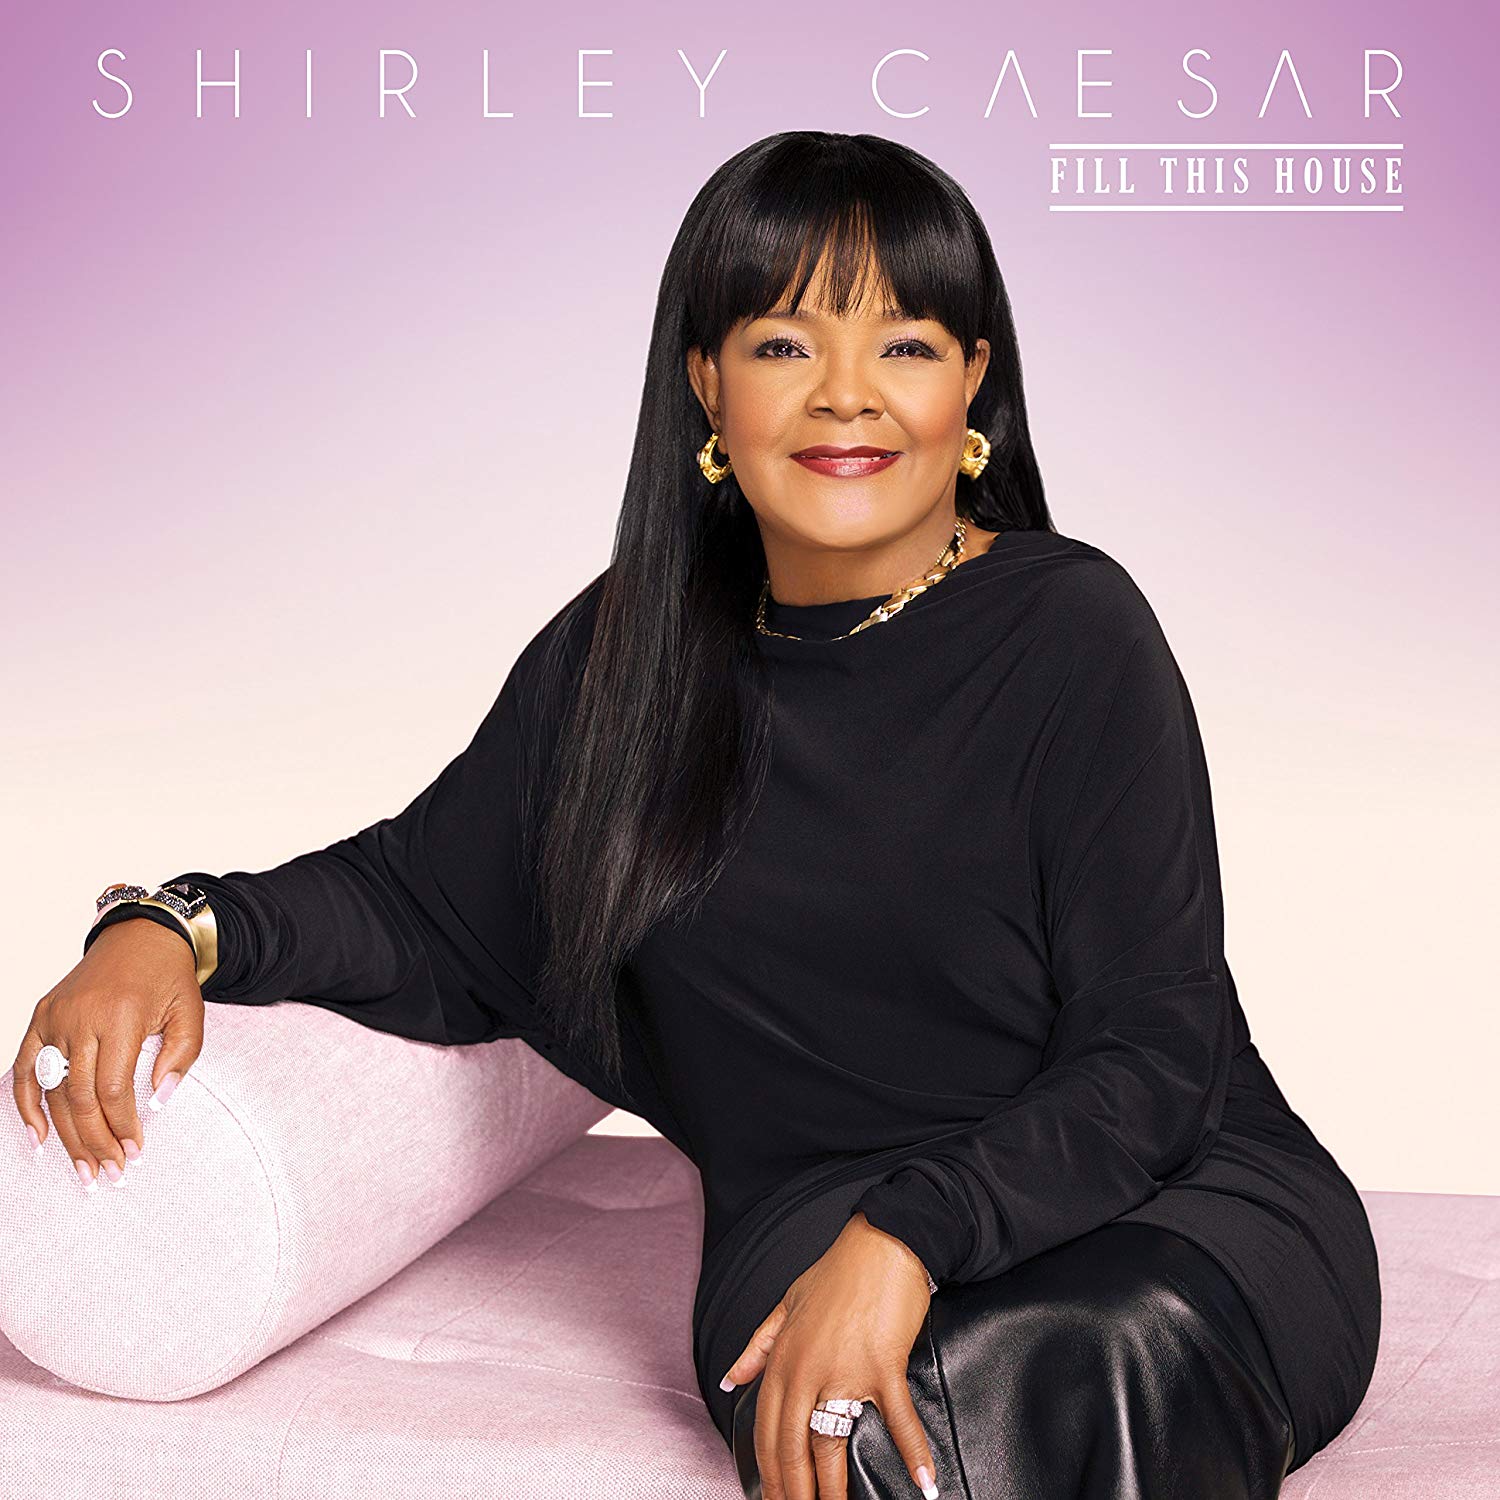 Fill This House CD - Shirley Caesar